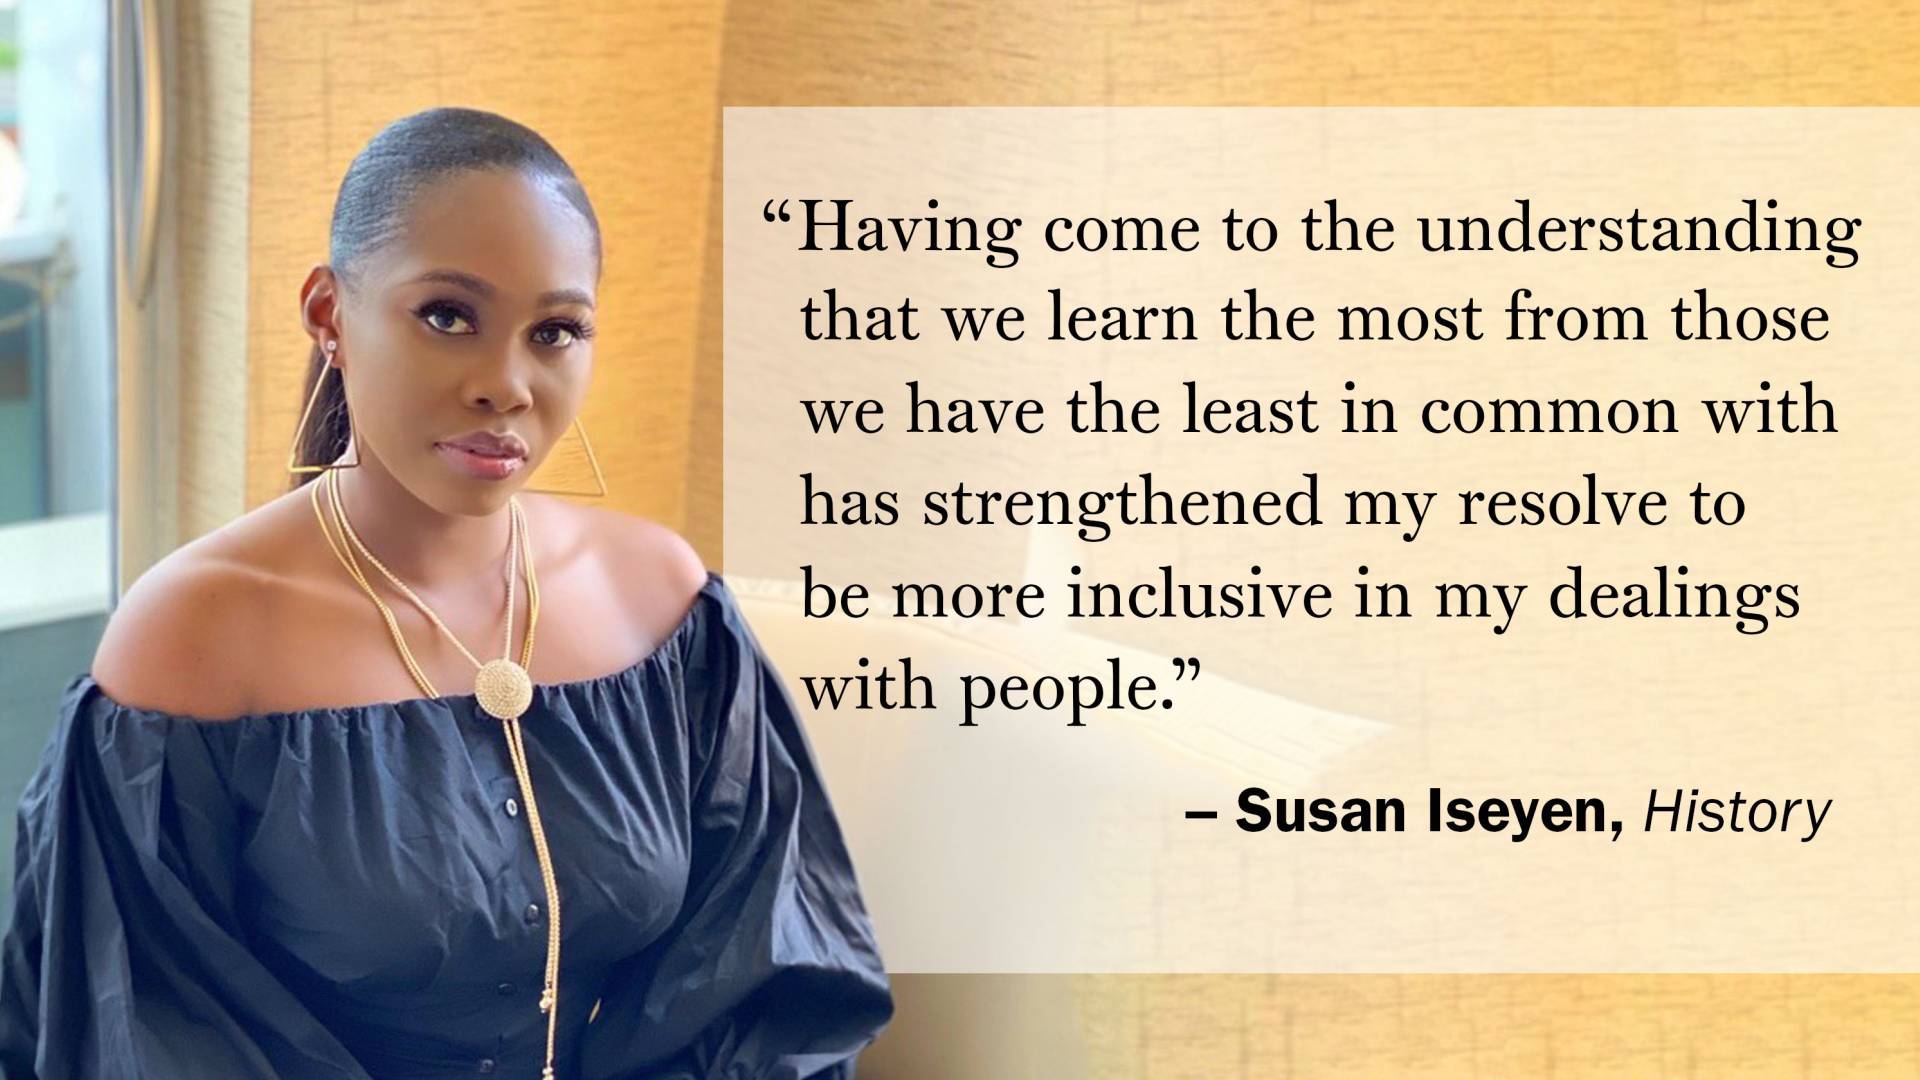 "Having come to the understanding that we learn the most from those we have the least in common with has strengthened my resolve to be more inclusive in my dealings with people." —Susan Iseyen, History